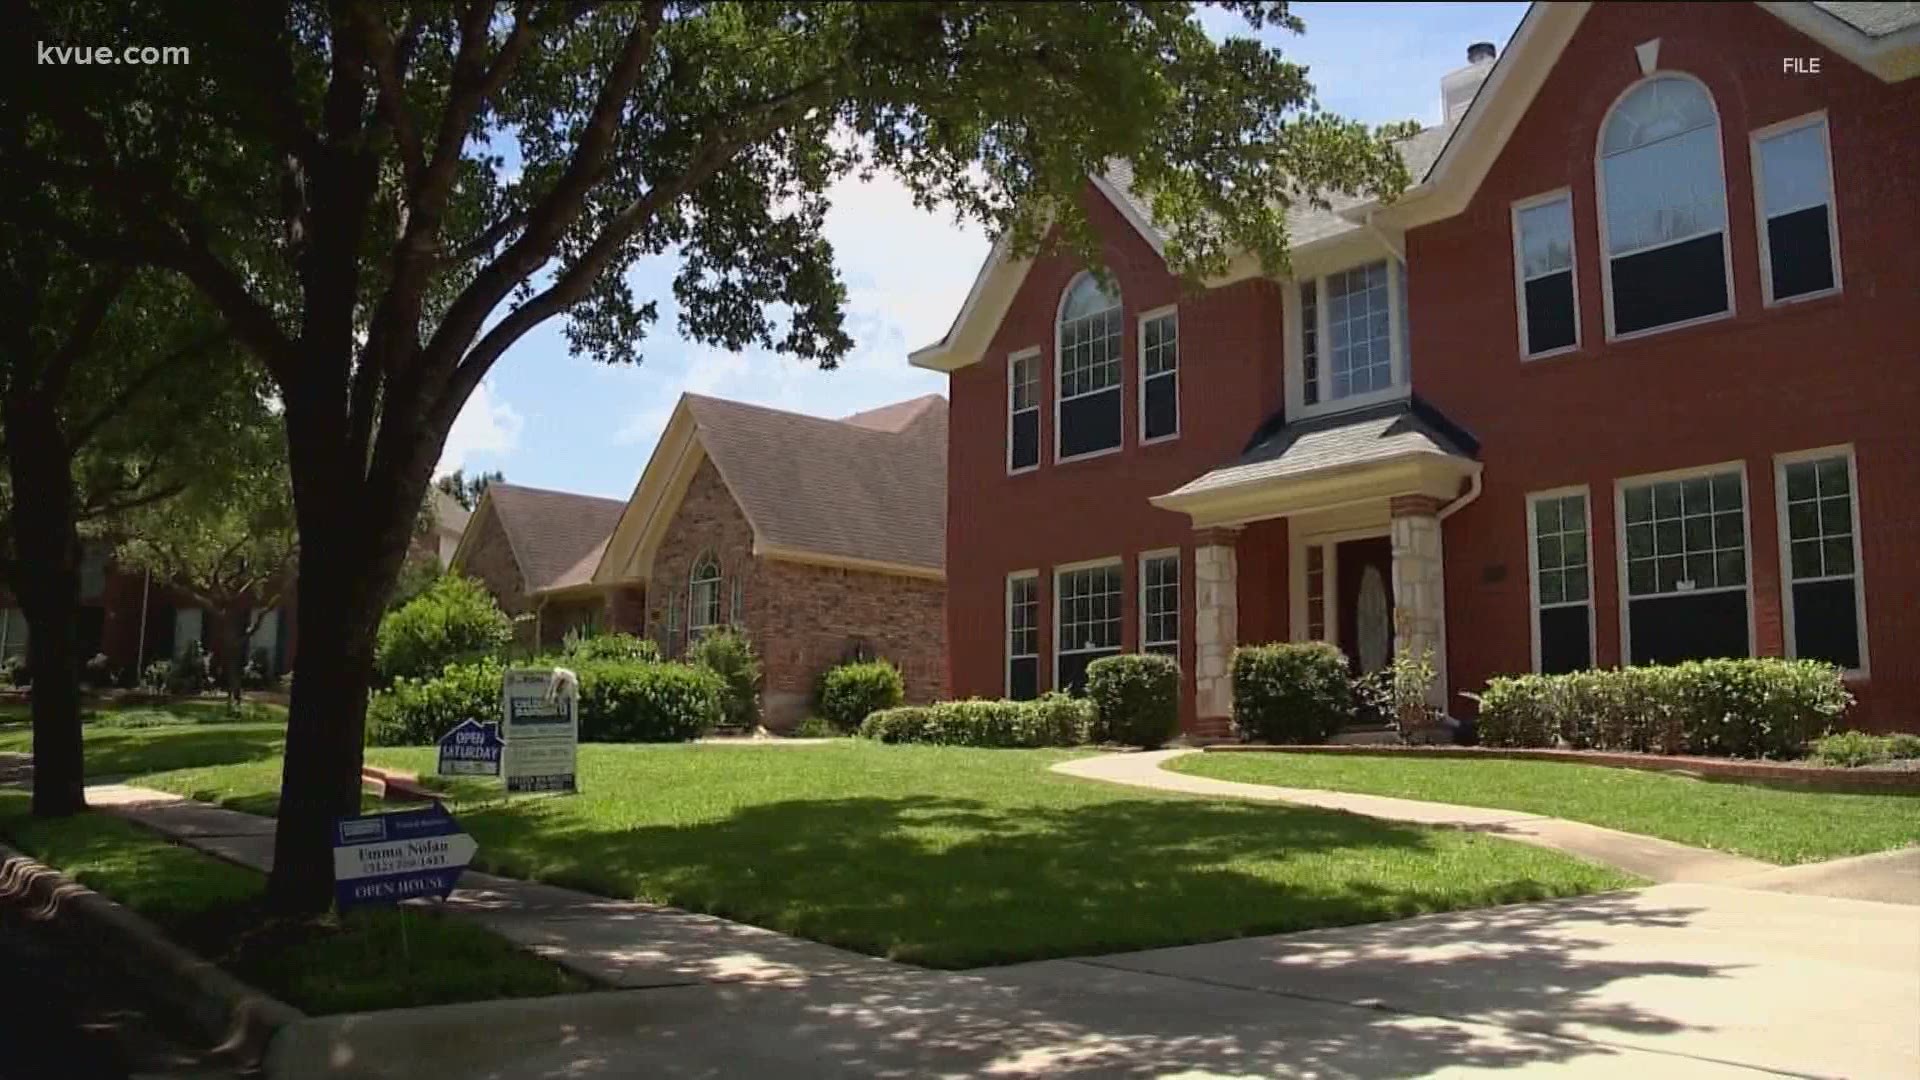 The measure can help people with disabilities or people over the age of 65 in Travis County save some money on their property tax bills in the upcoming fiscal year.